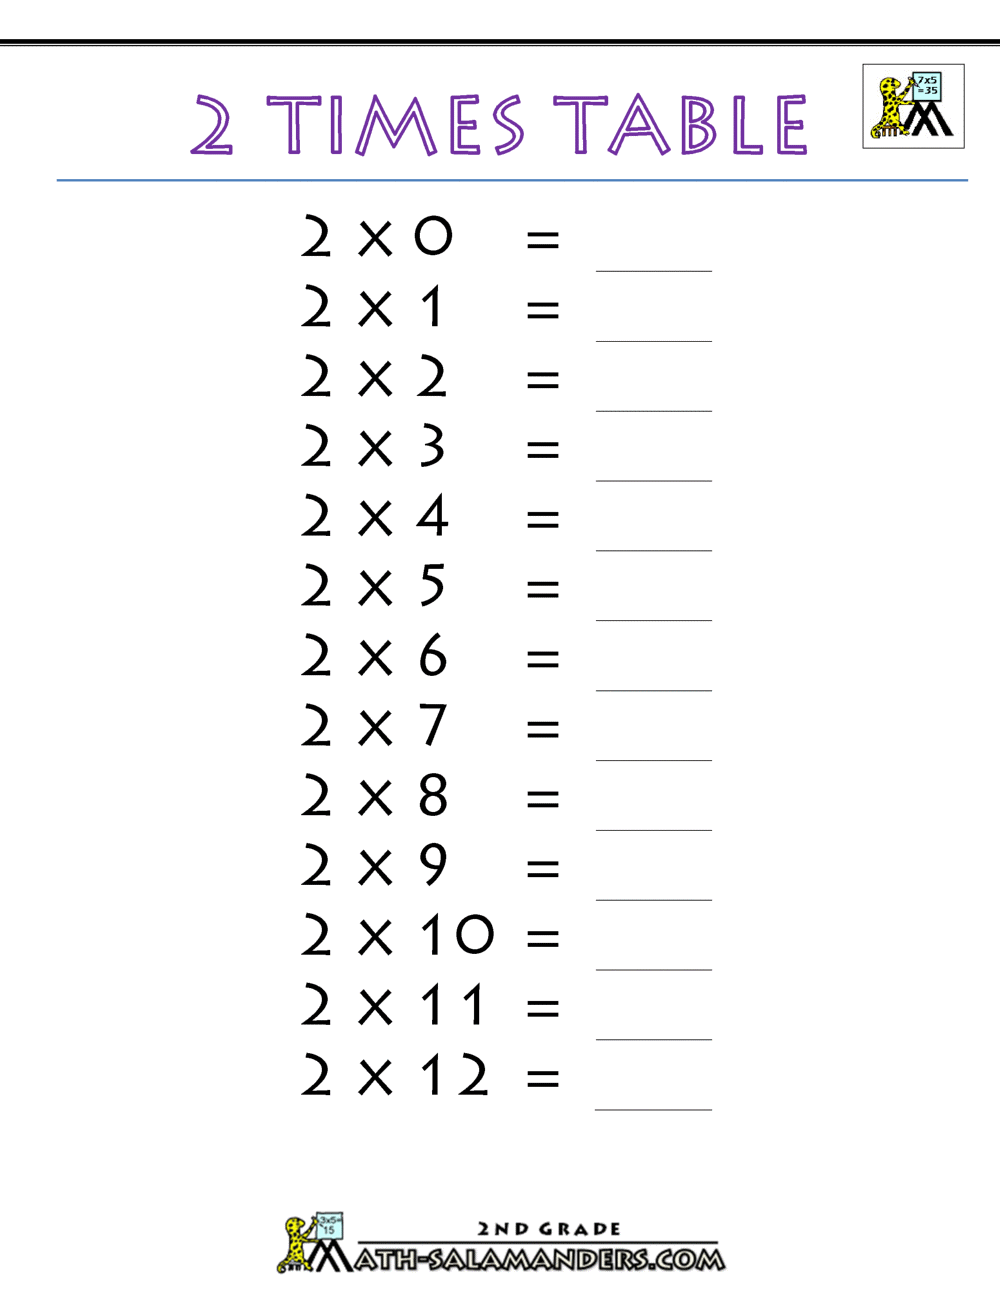 Free Printable 2 Times Table Worksheets